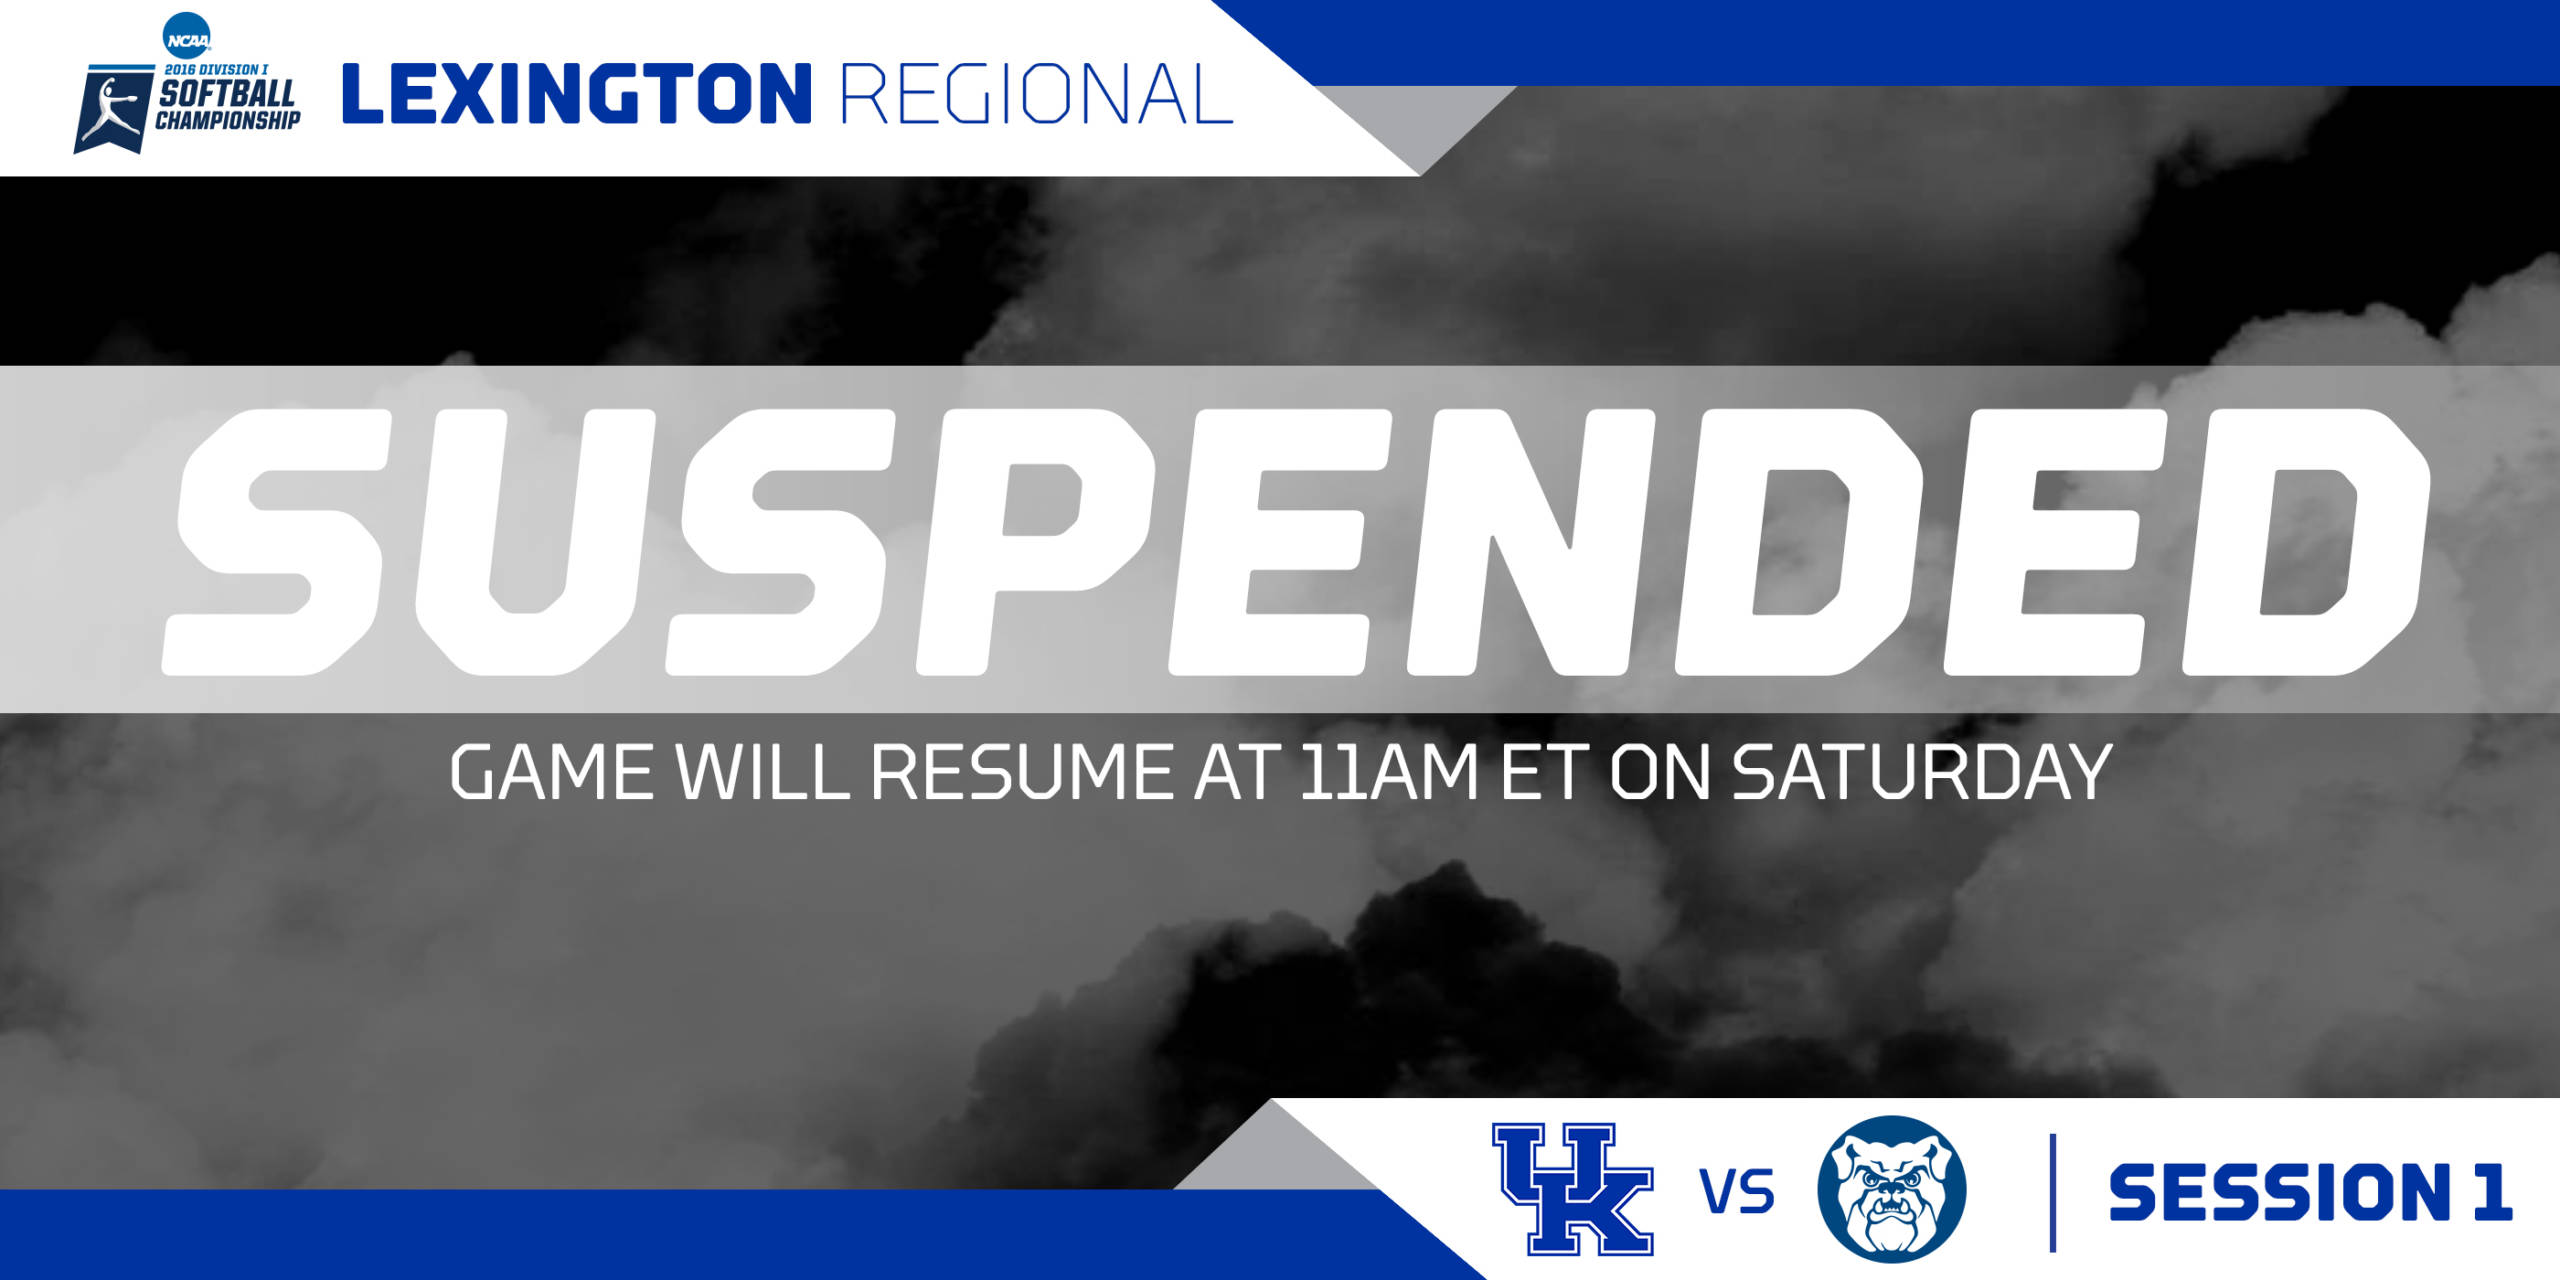 Kentucky and Butler Suspended Until Saturday Morning